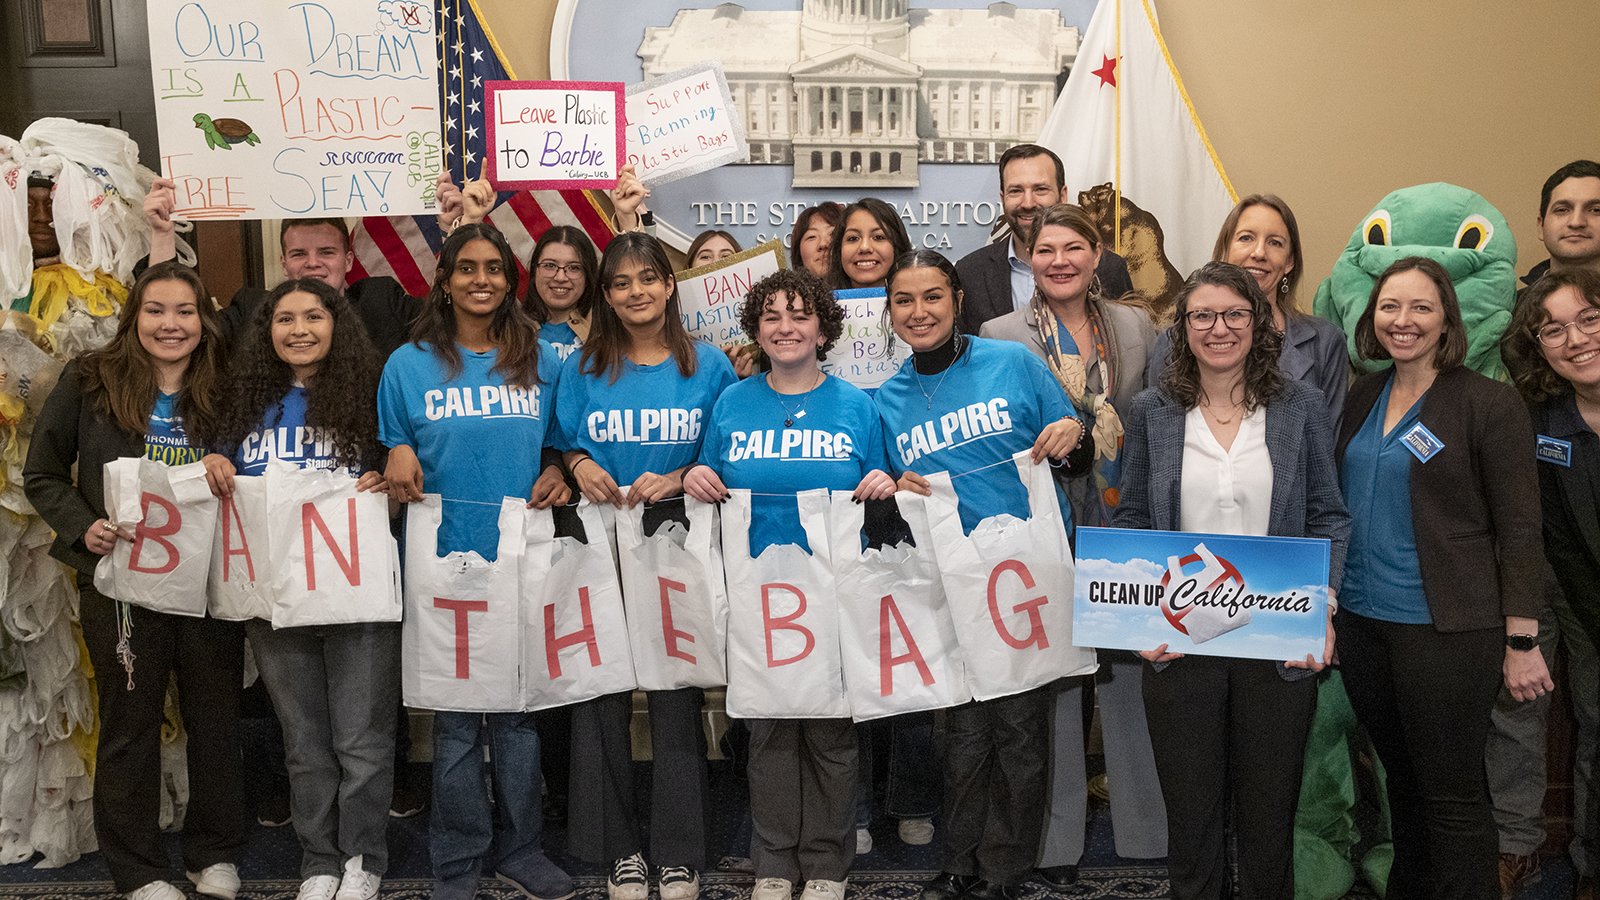 CALPIRG staff, students and coalition partners showed support for legislation that would improve upon an existing law that we helped pass back in 2014 that intended to ban plastic bags in grocery stores.